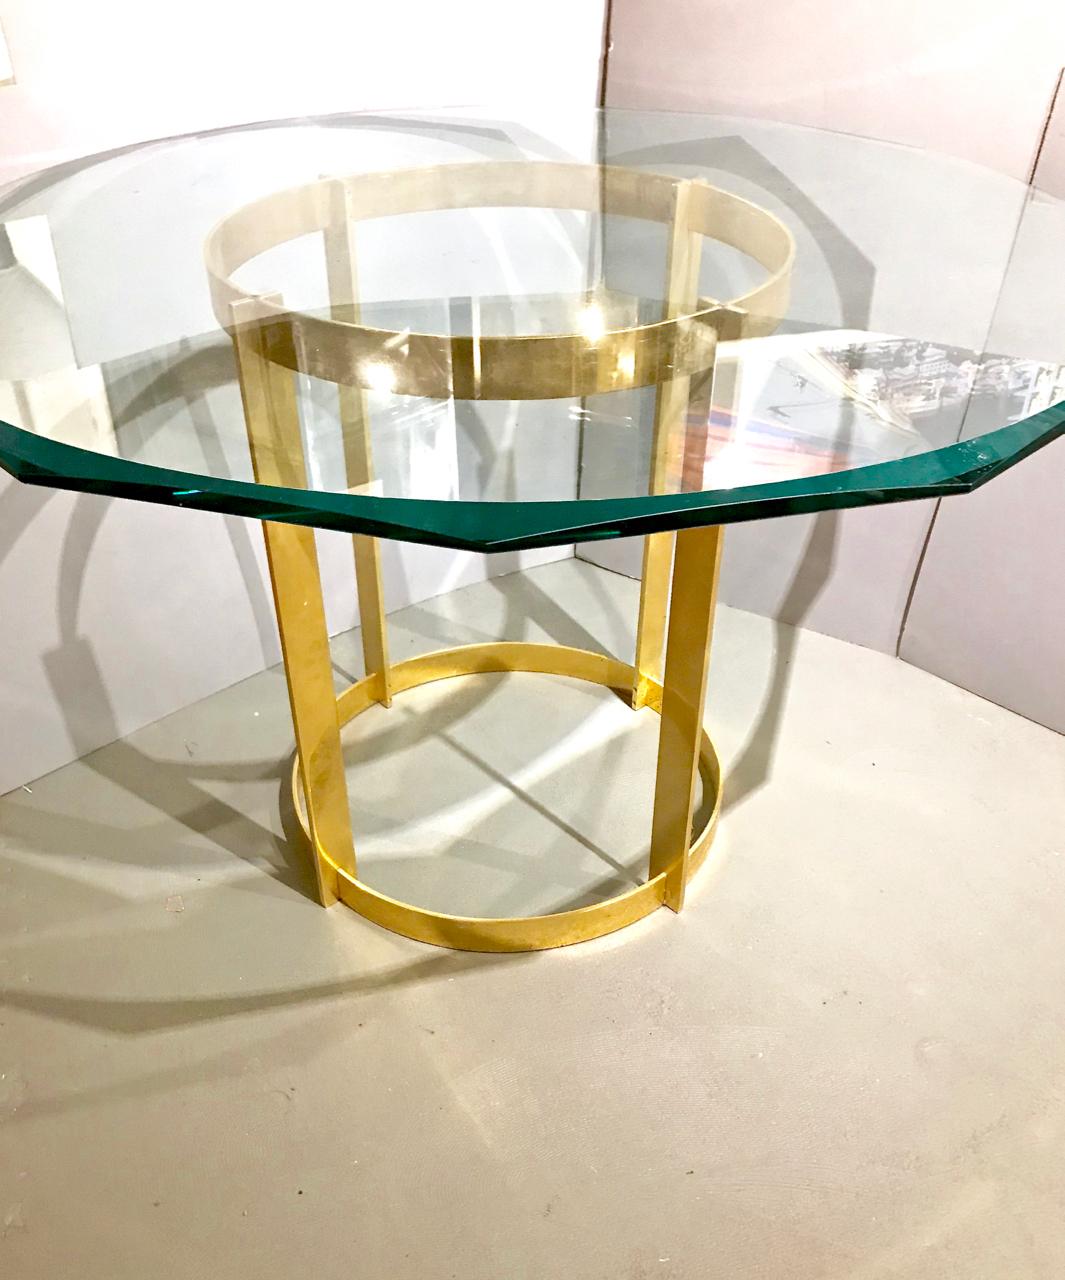 This is a stunning gilt bronze and glass center or dining table attributed to/style of Fontana Arte that dates to circa 1980s. This super chic table is the perfect all occasion table: it will seat 4-5 persons comfortably or it can act as a